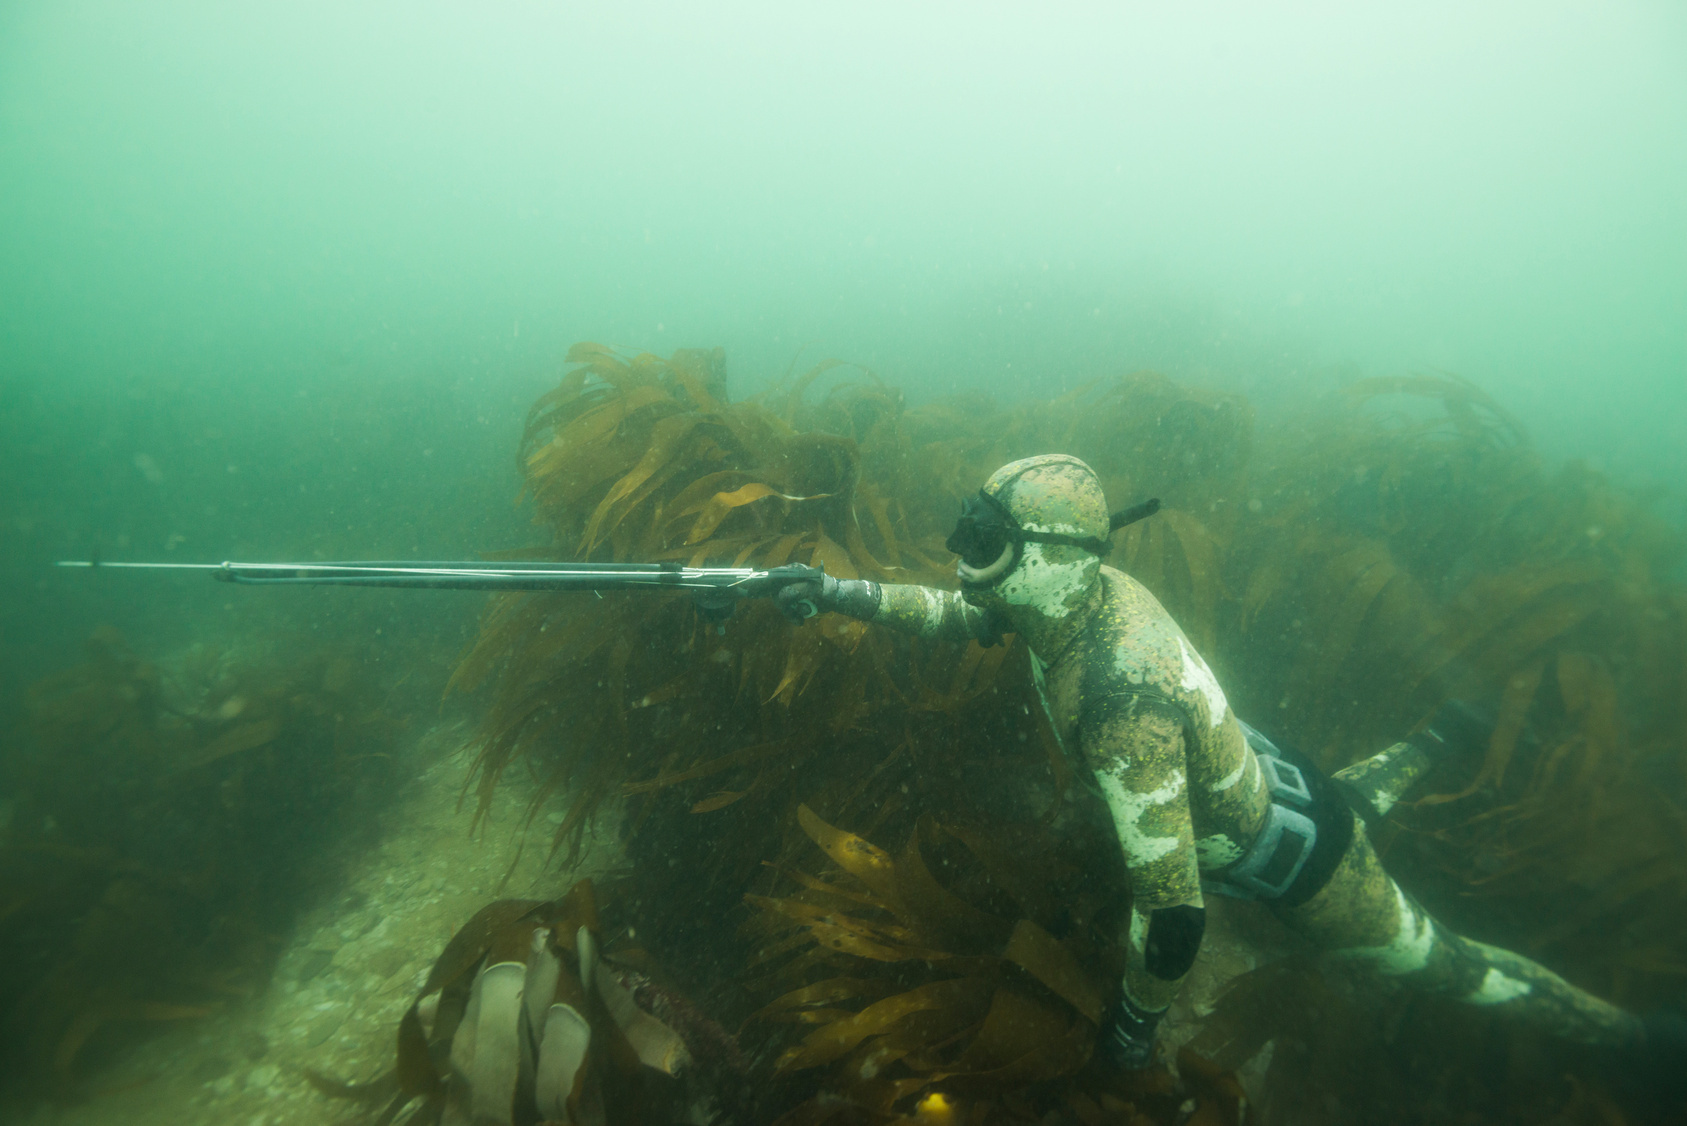 A spearfisherman holding a speargun and wearing a camo wetsuit waits in the kelp.